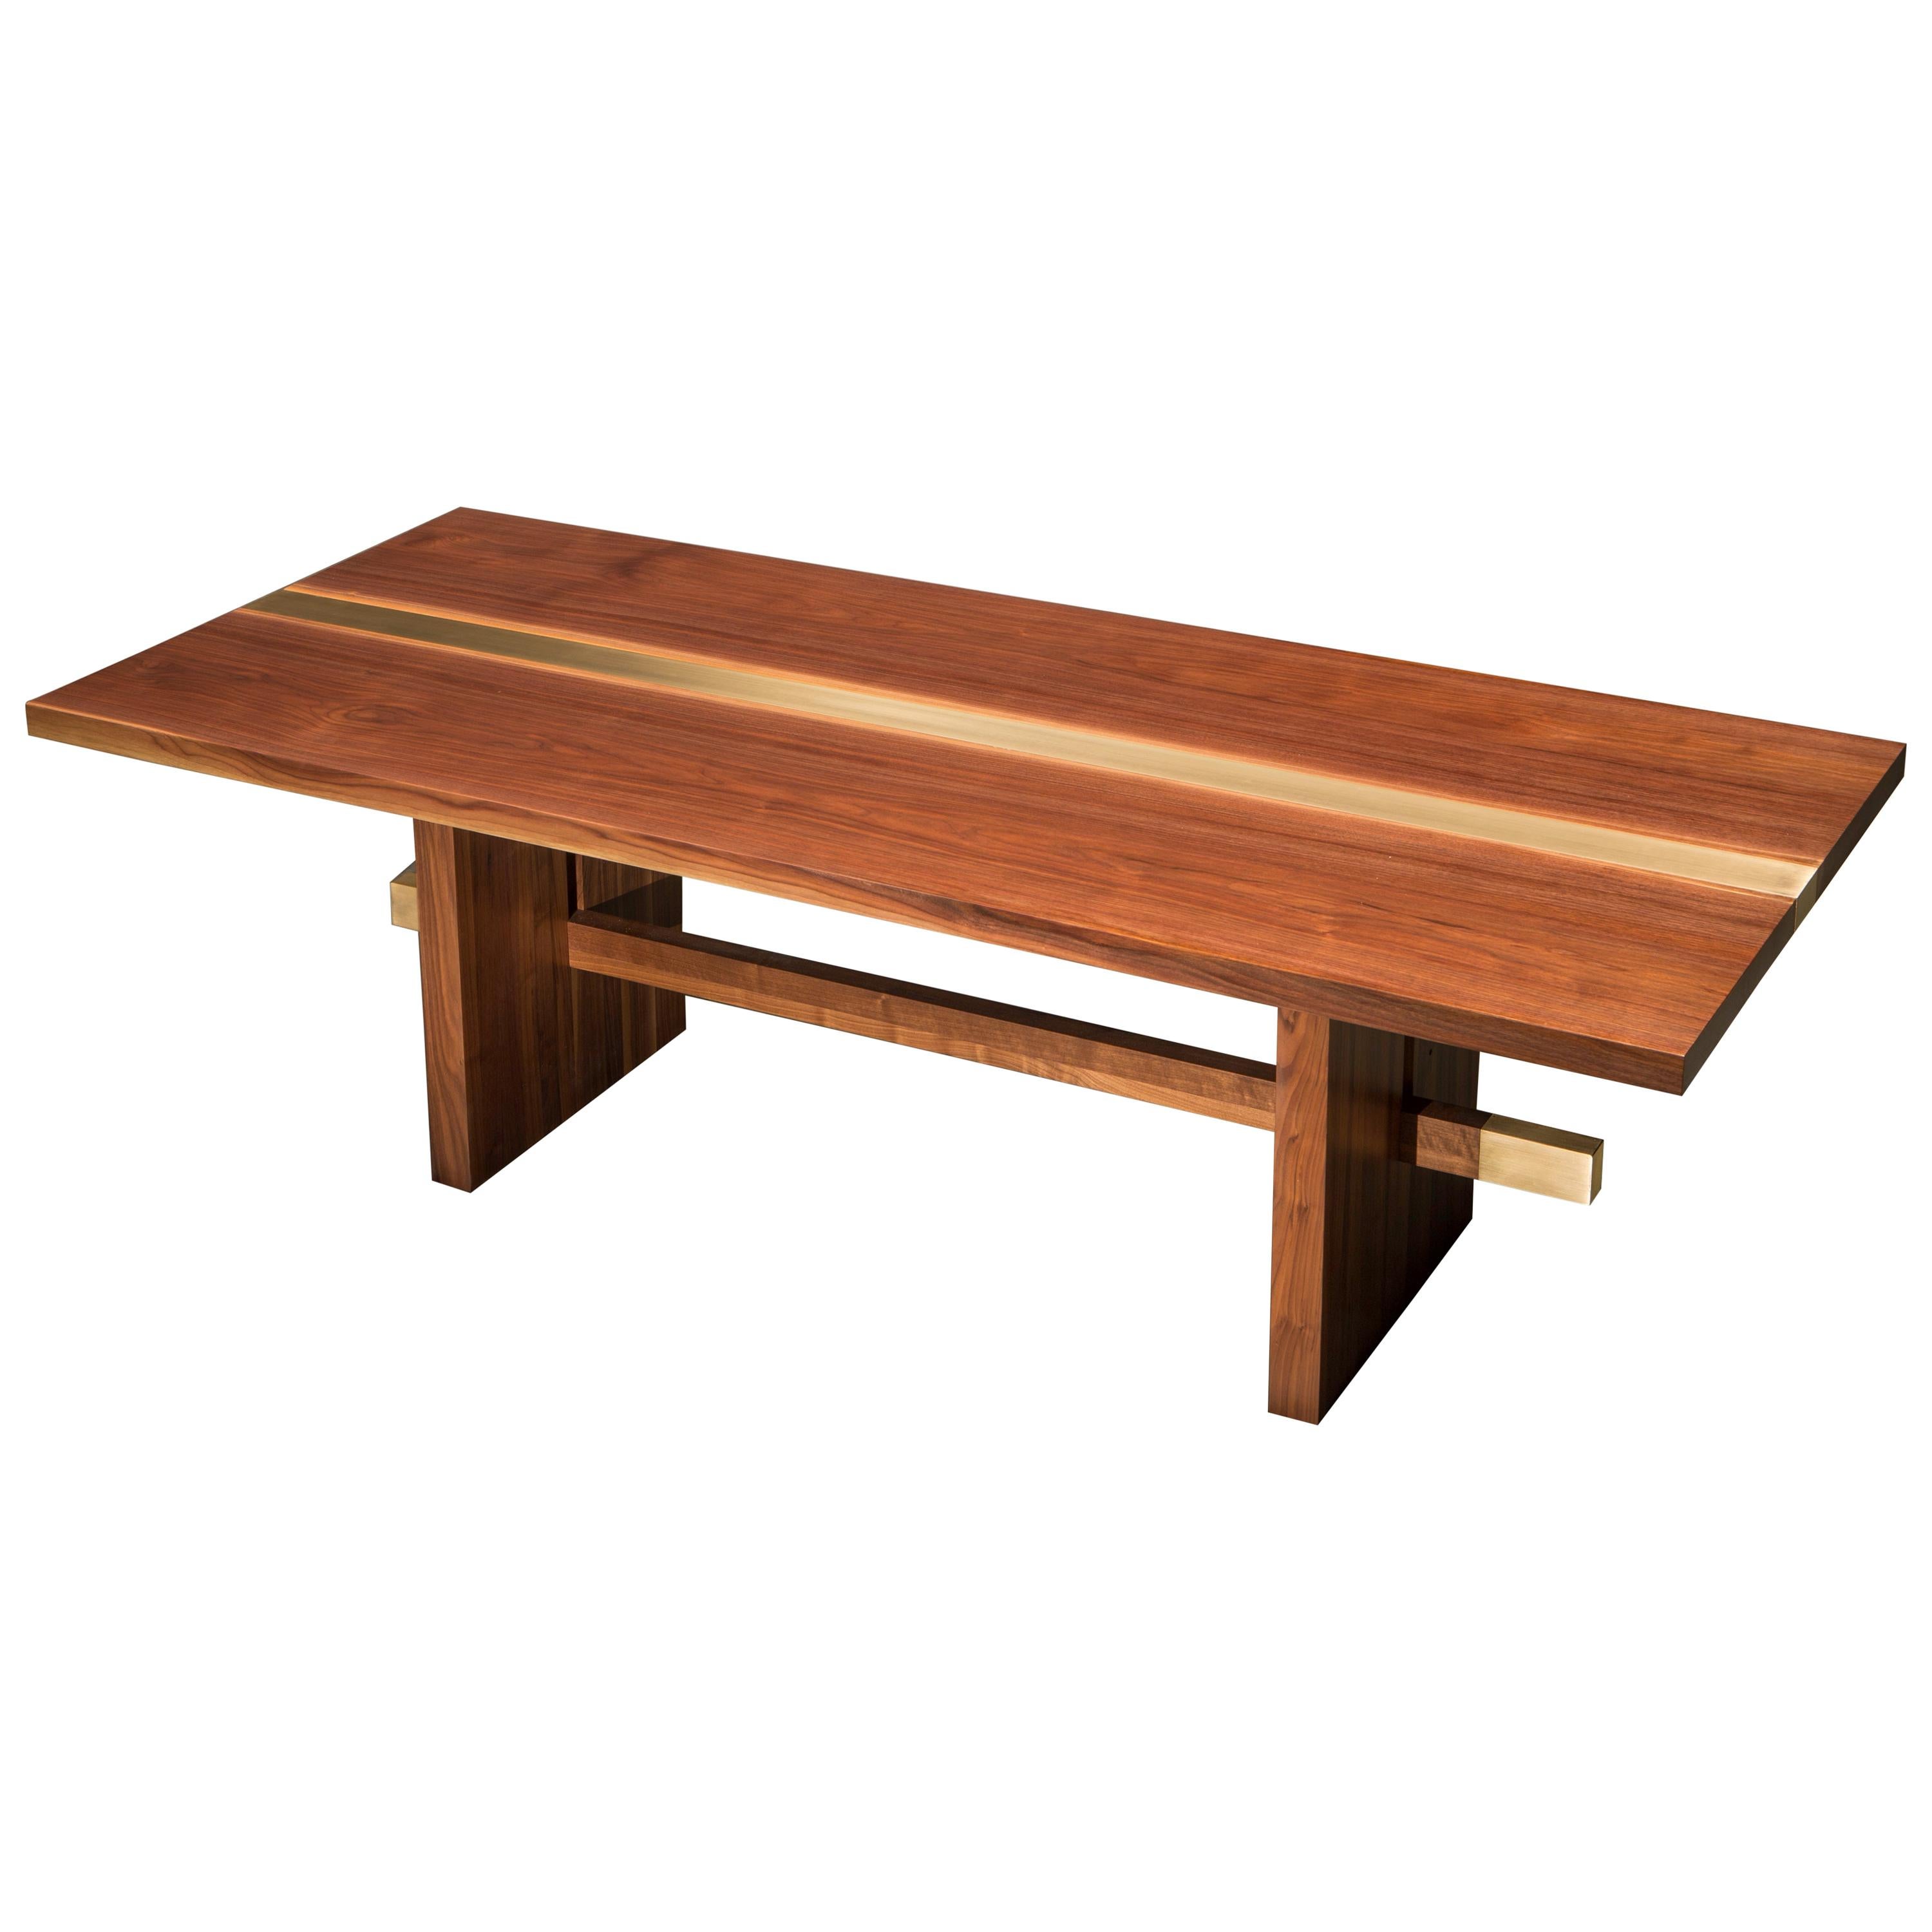 Solid Walnut with Brass Inlay on Solid Walnut Base "Dequindre Dining Table"